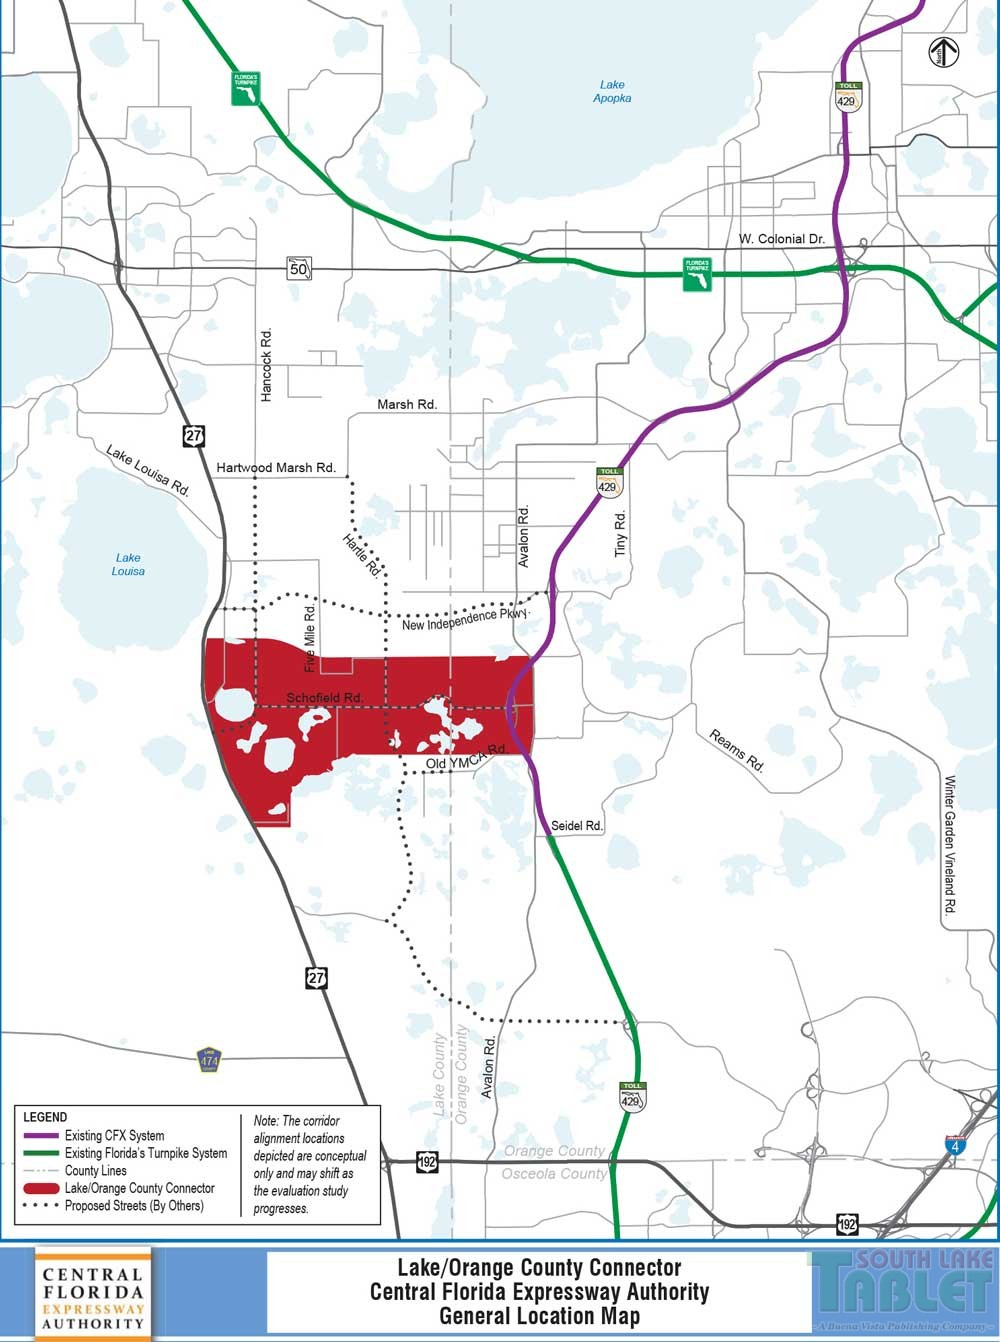 Expressway Authority To Discuss Extension From 429 To Highway 27 - Road Map Of Lake County Florida